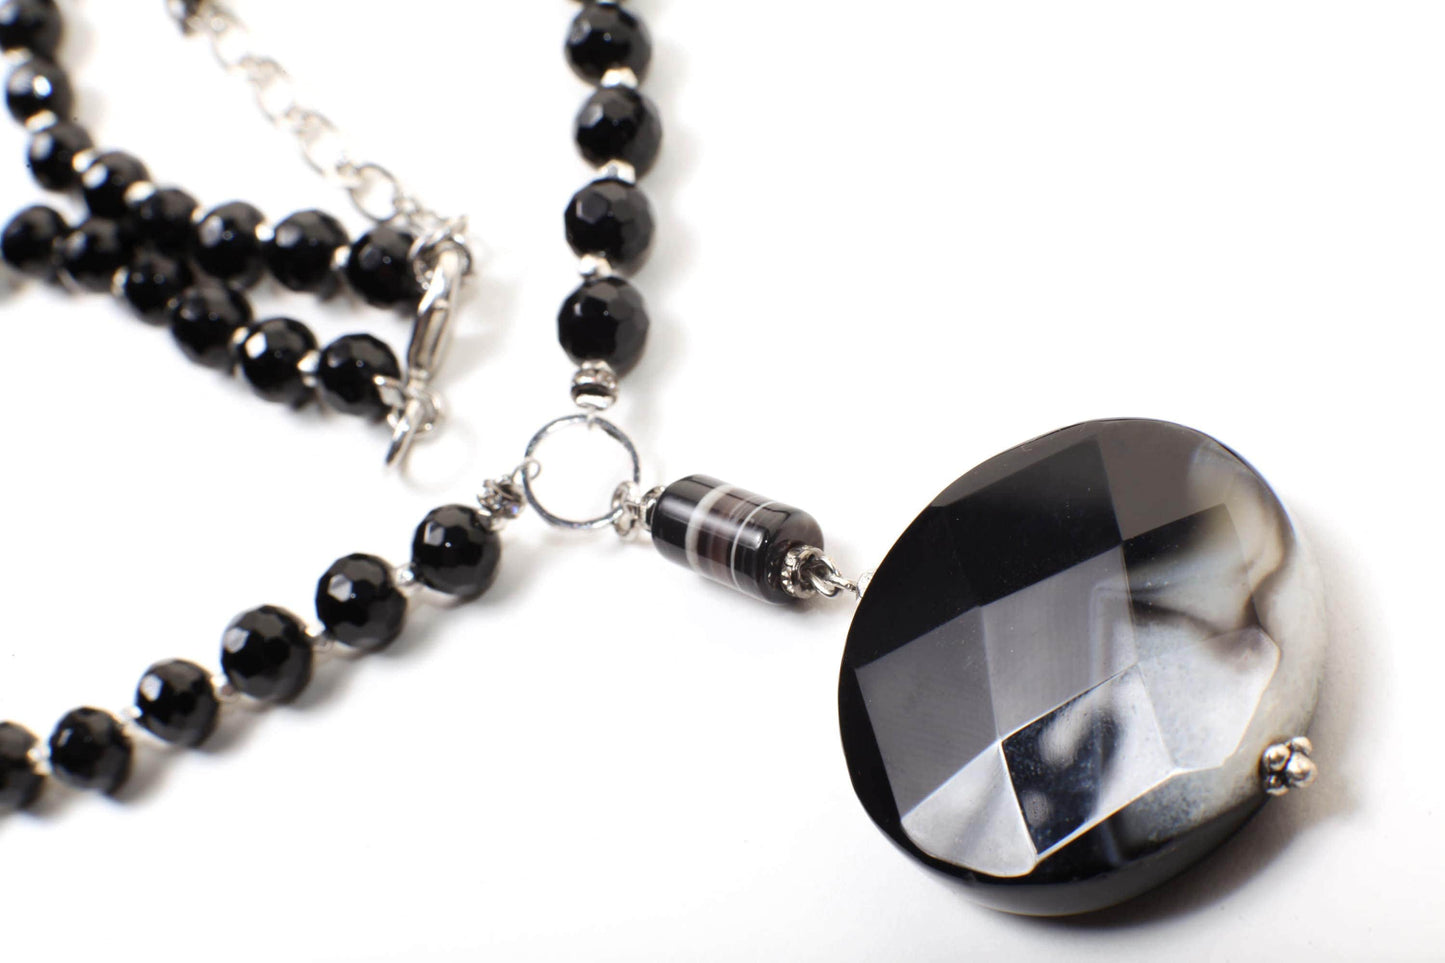 Black Fire Agate 39mm Faceted Disk Pendant with Dangling Stripe Agate Tube Accent Bead, Black Onyx Beaded Necklace 19&quot; with 2.5&quot; Extension